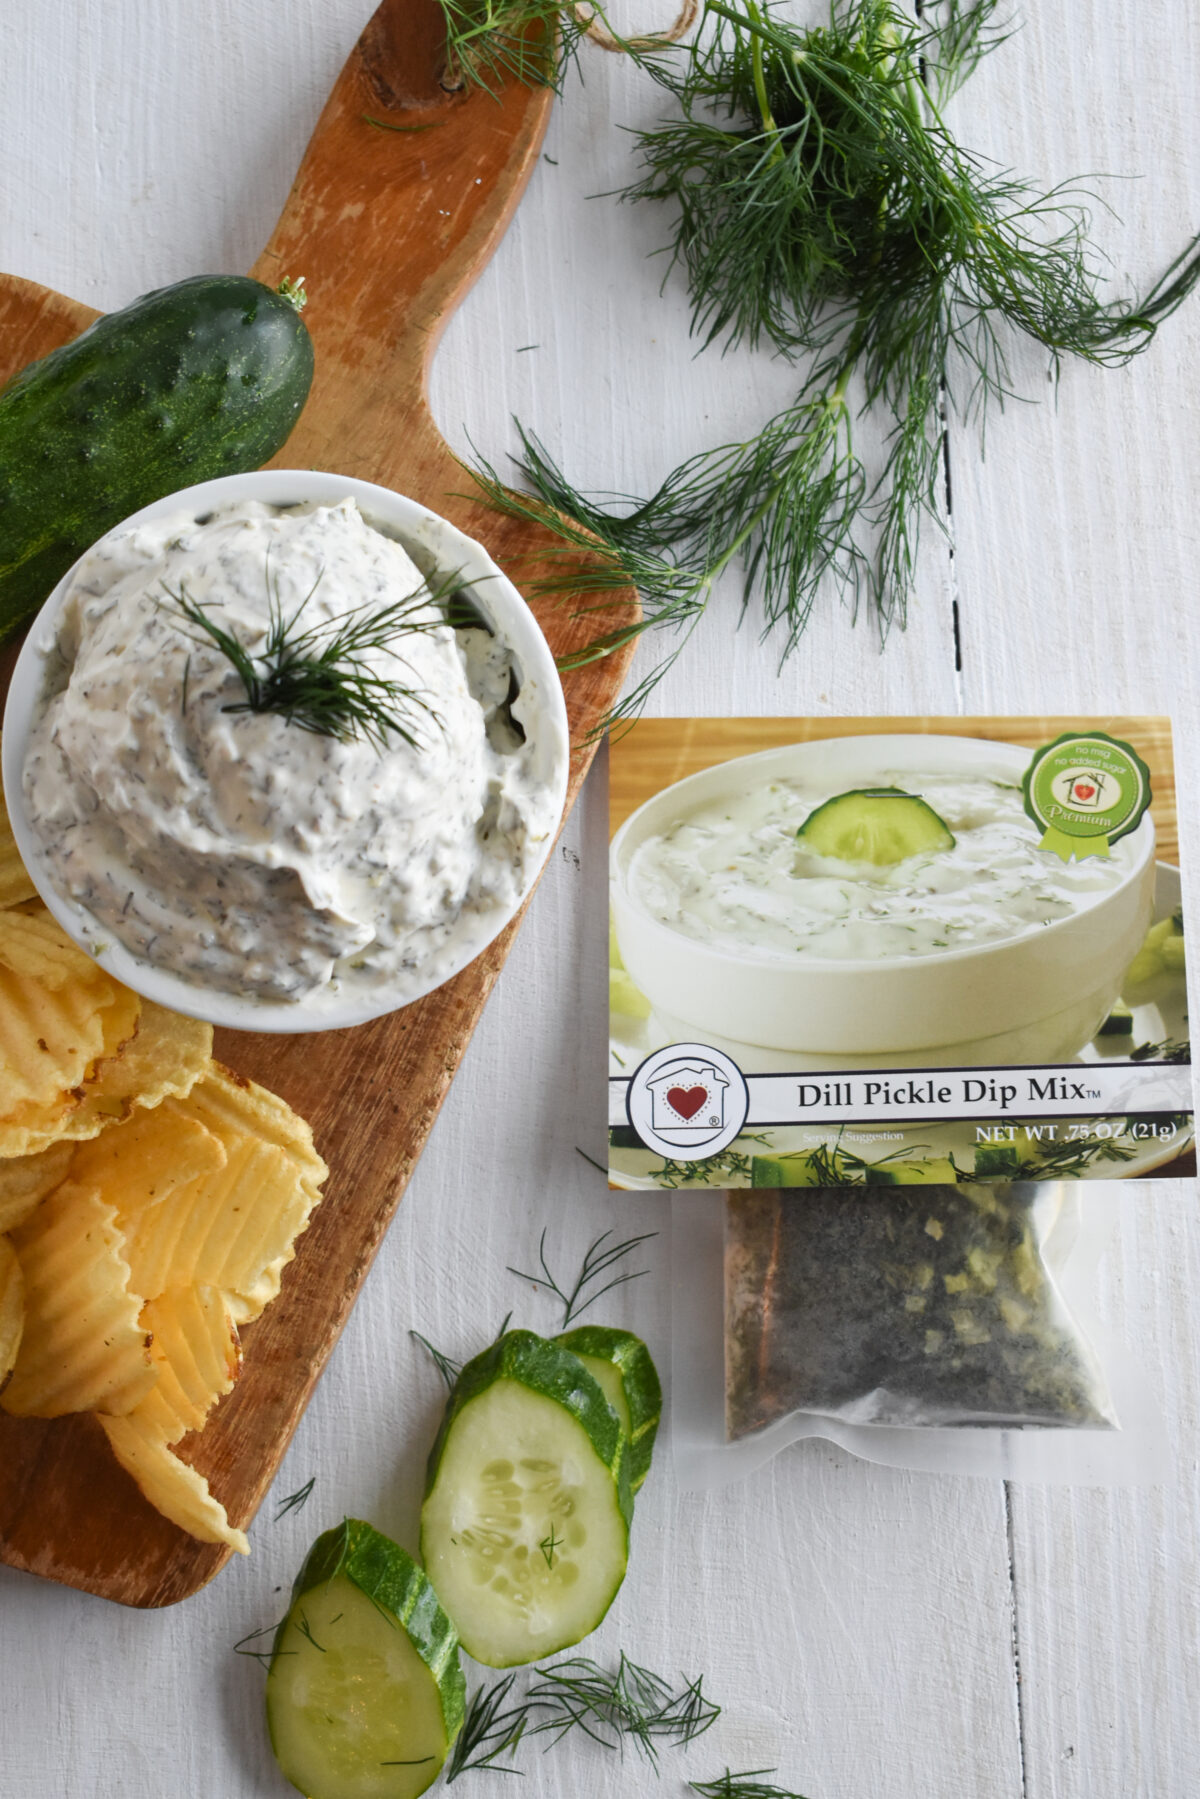 Dilly Dill Pickle Dip Mix